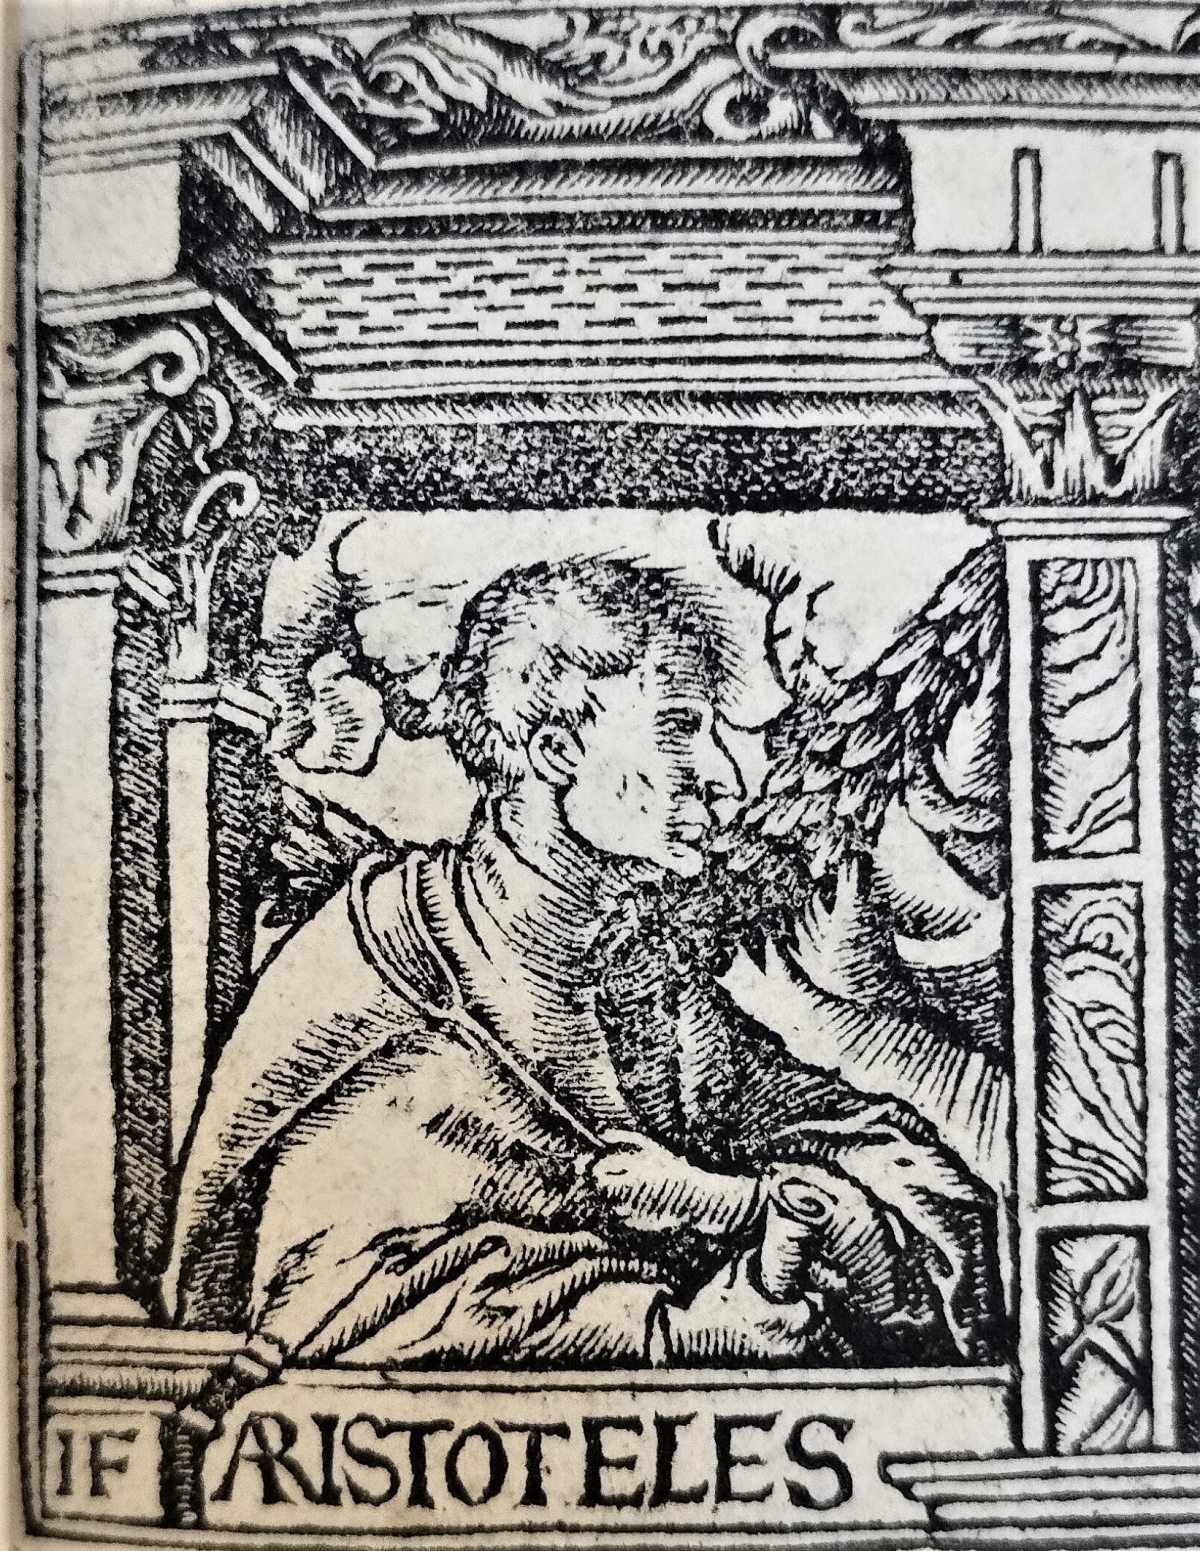 Detail of the woodcut in the title page, a portrait of Aristotle.